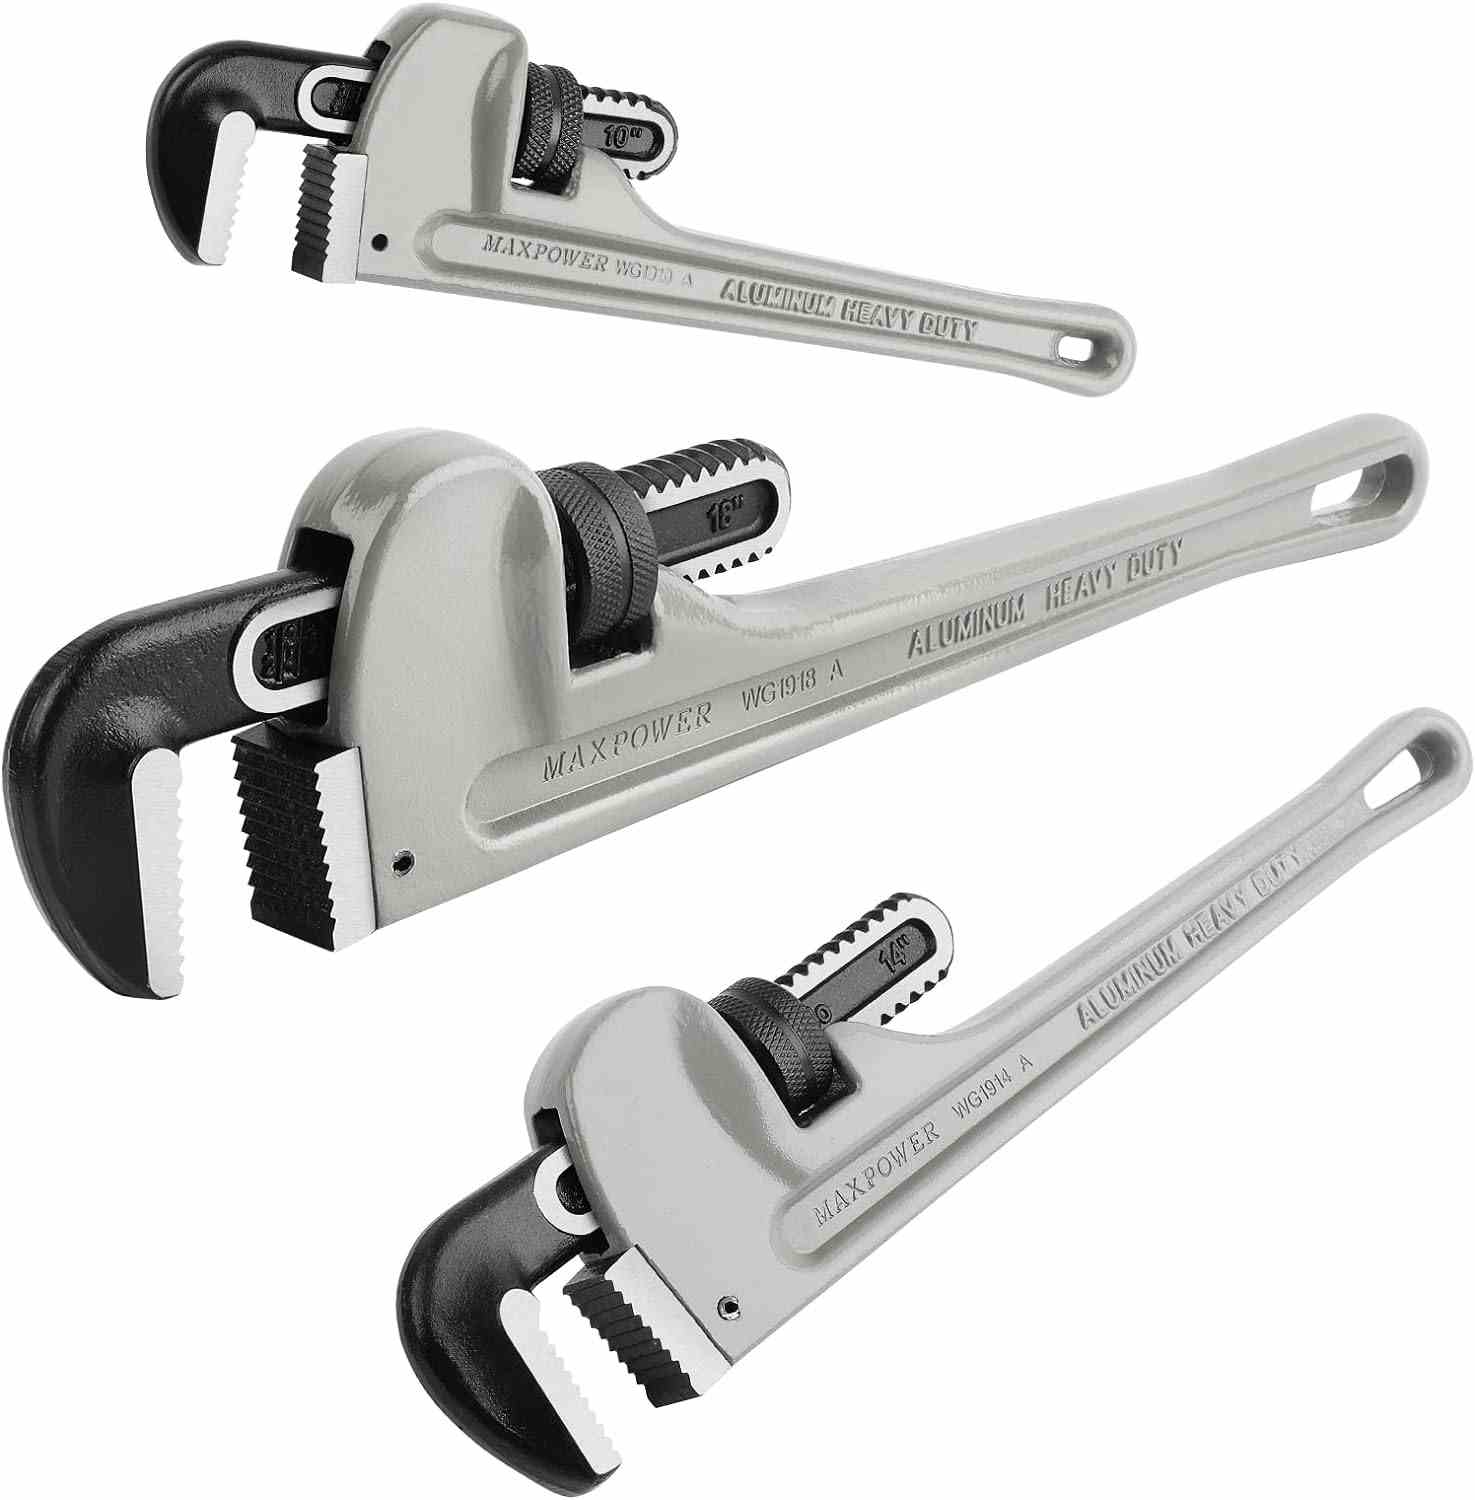 Pipe wrench tool